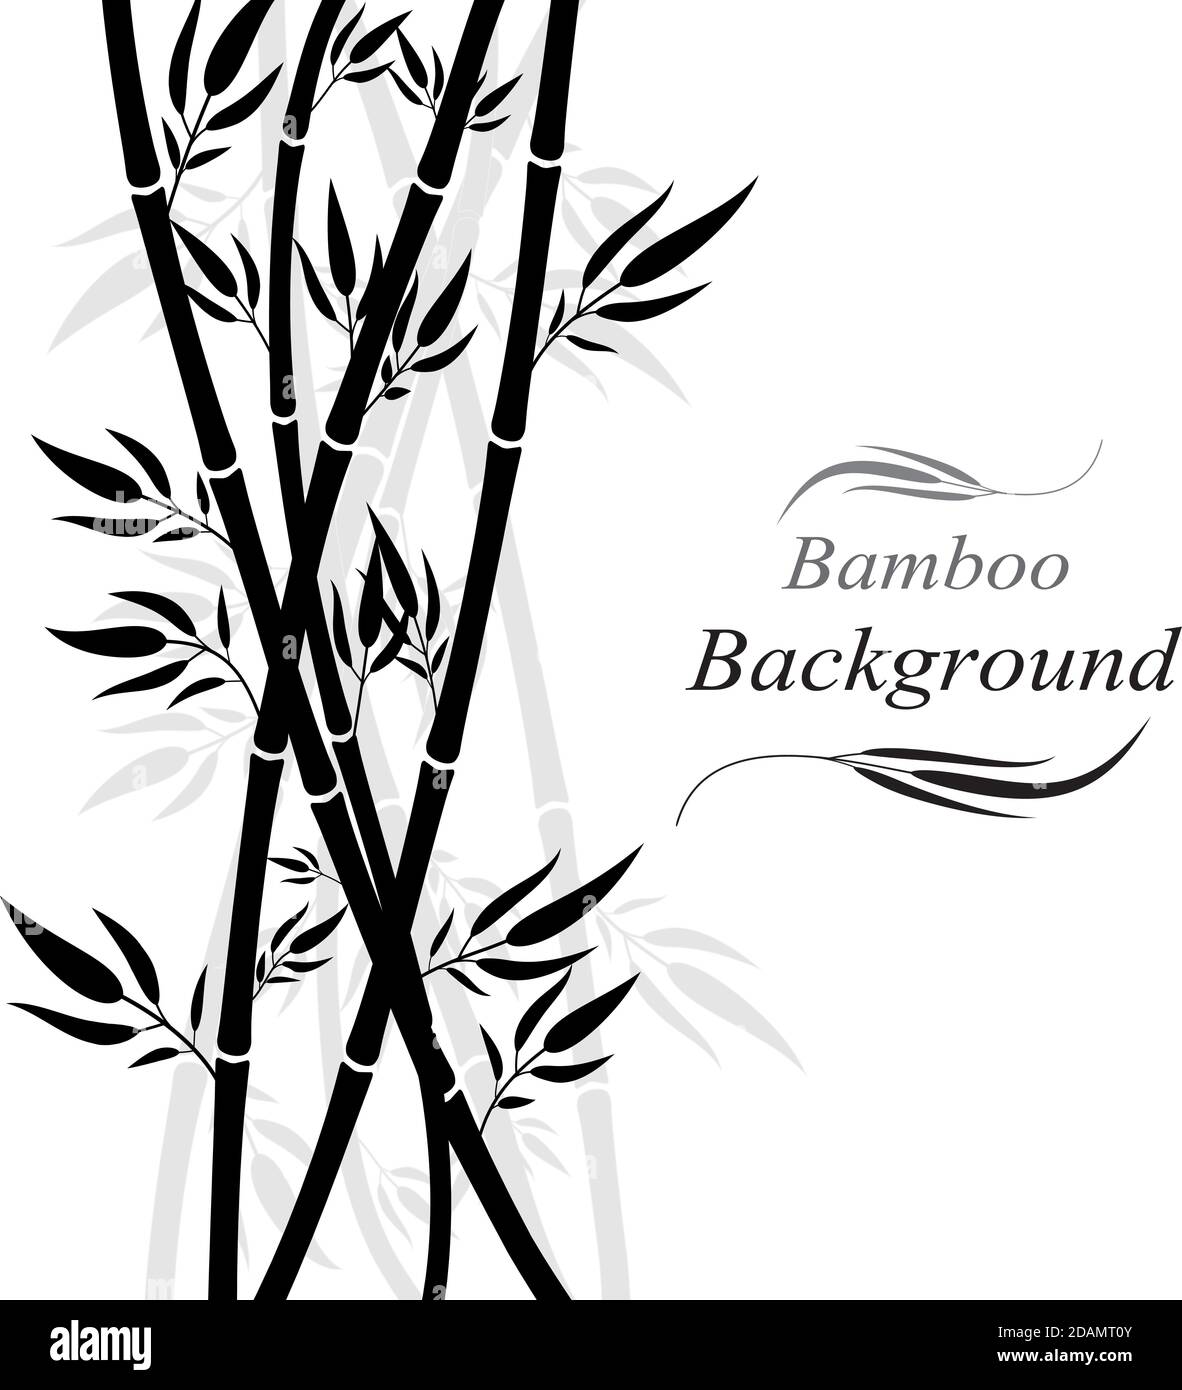 Bamboo forest.Chinese or japanese bamboo grass silhouette background art design.Vector illustration.Eps10 Stock Vector